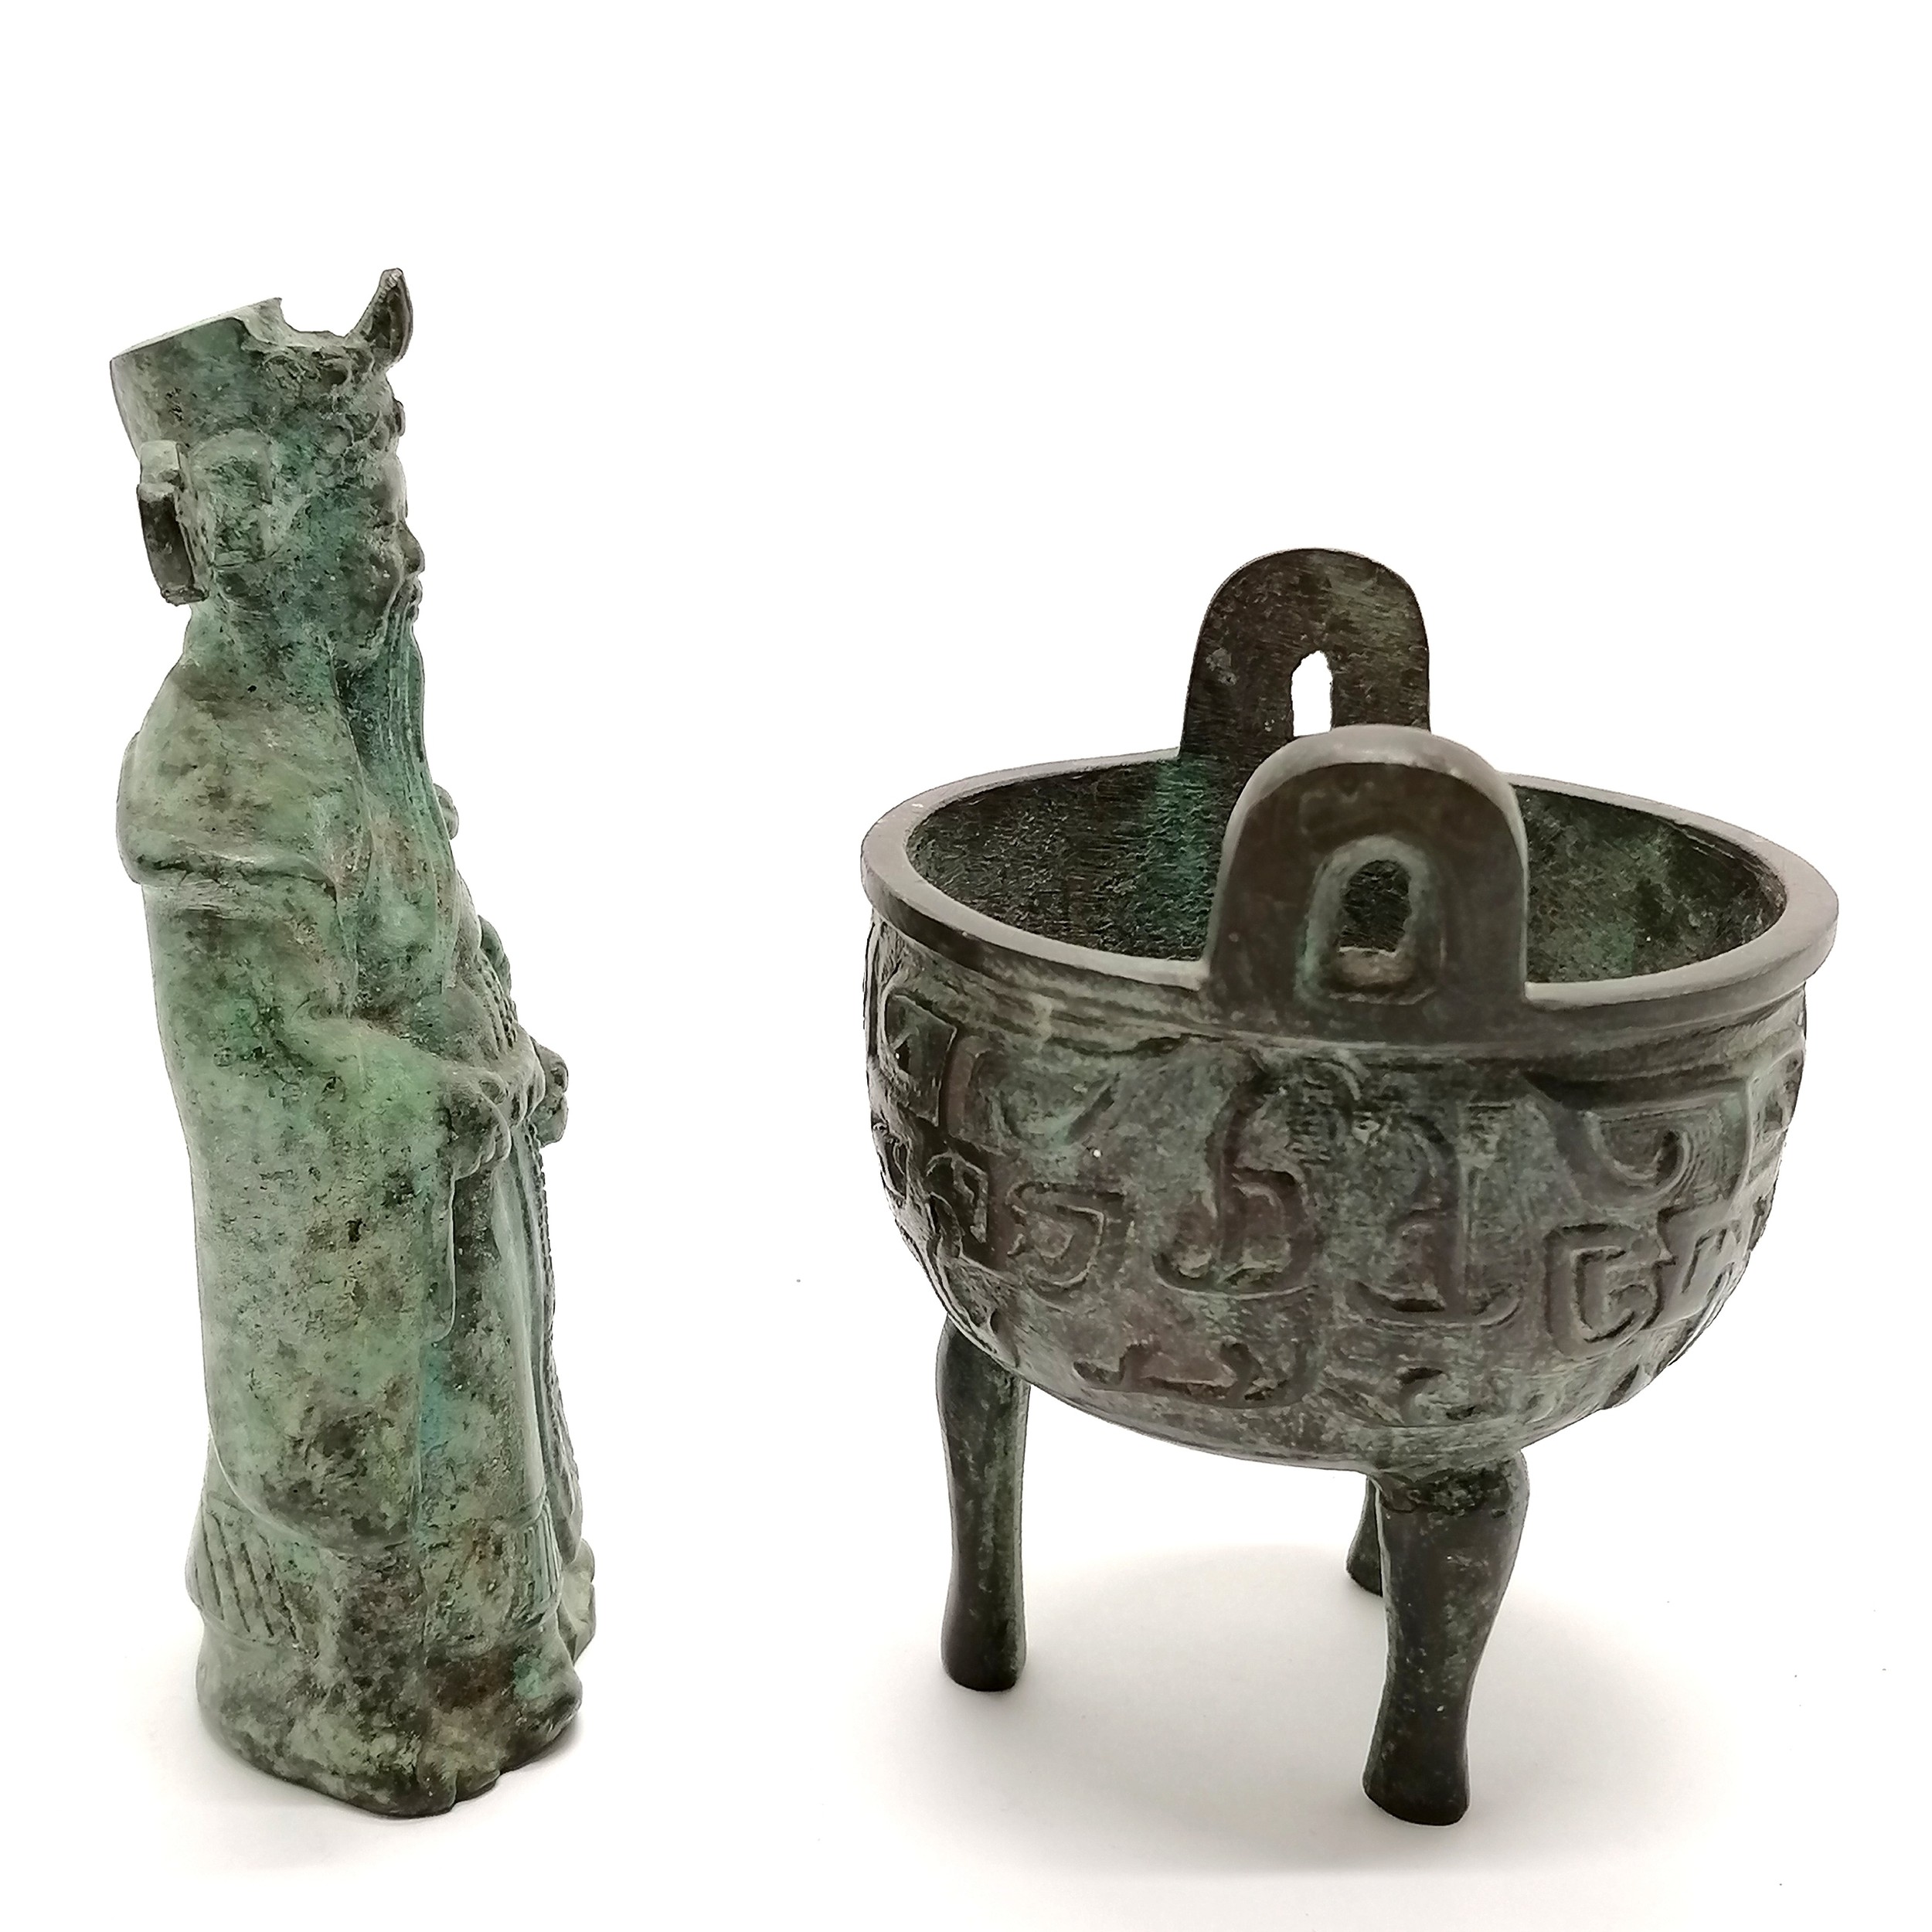 Chinese bronze cast censor & figure (15cm high) - Image 4 of 4